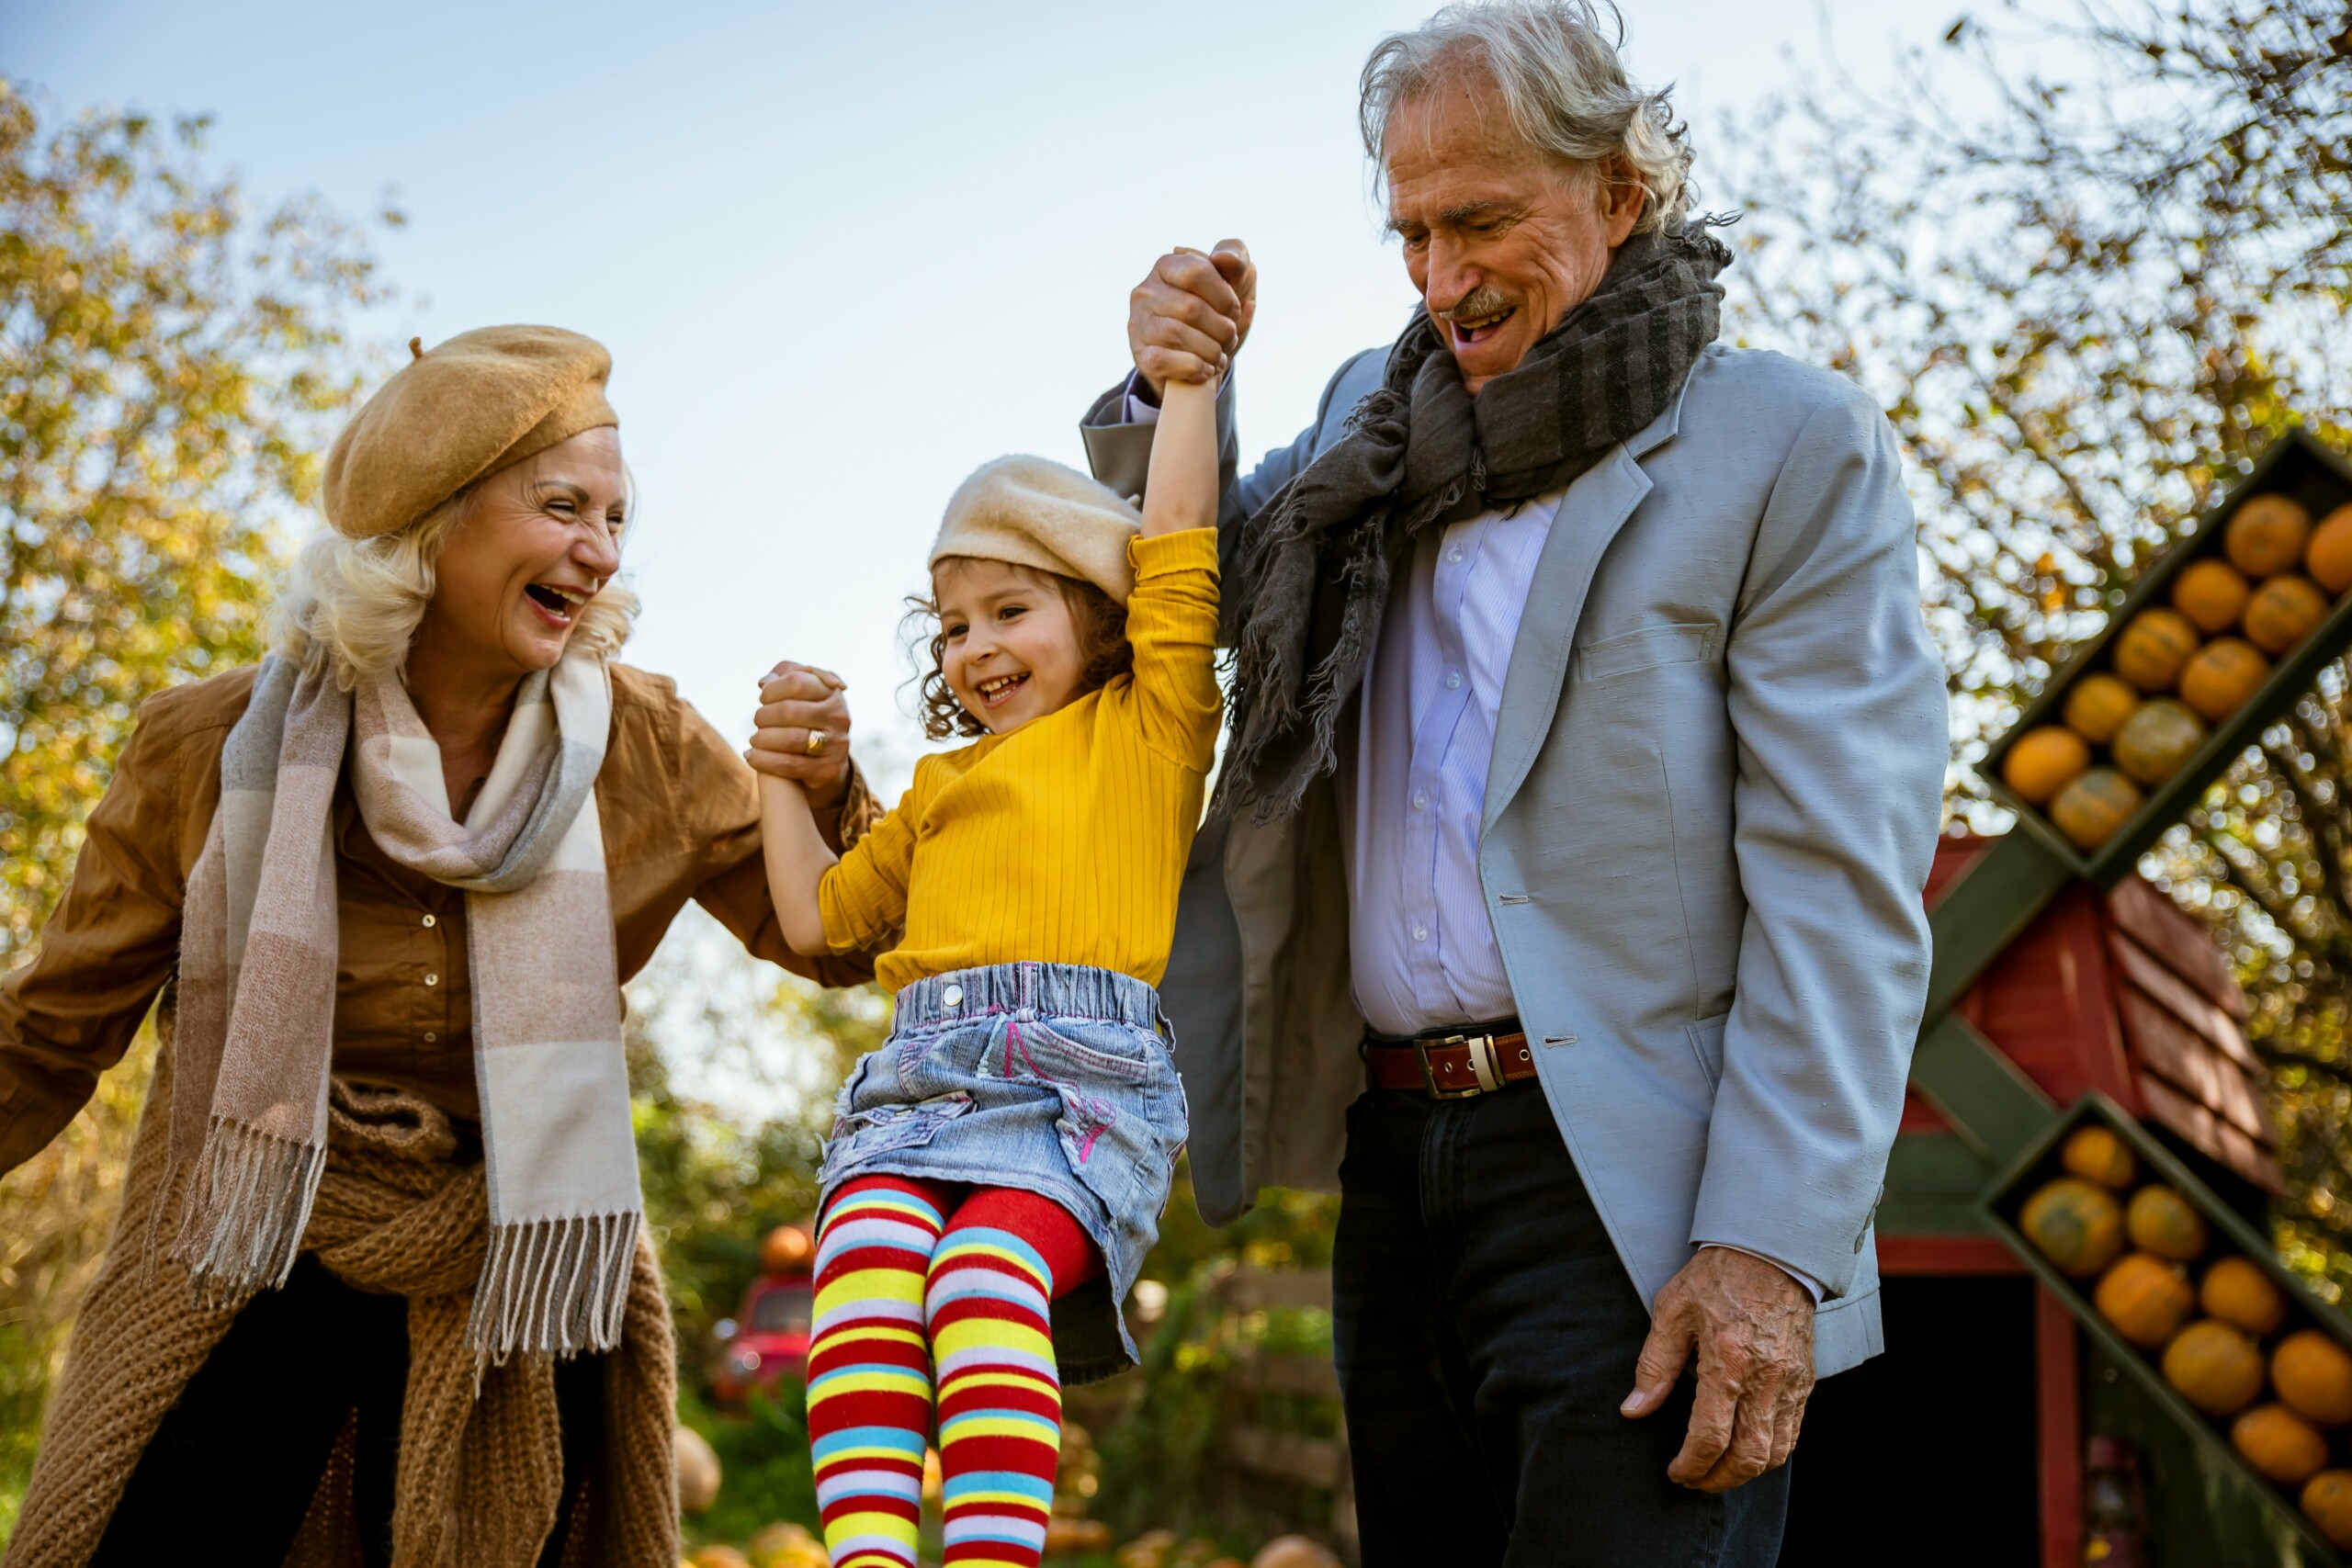 Here Are The Most Popular Grandparent Nicknames In America, According To A New Study